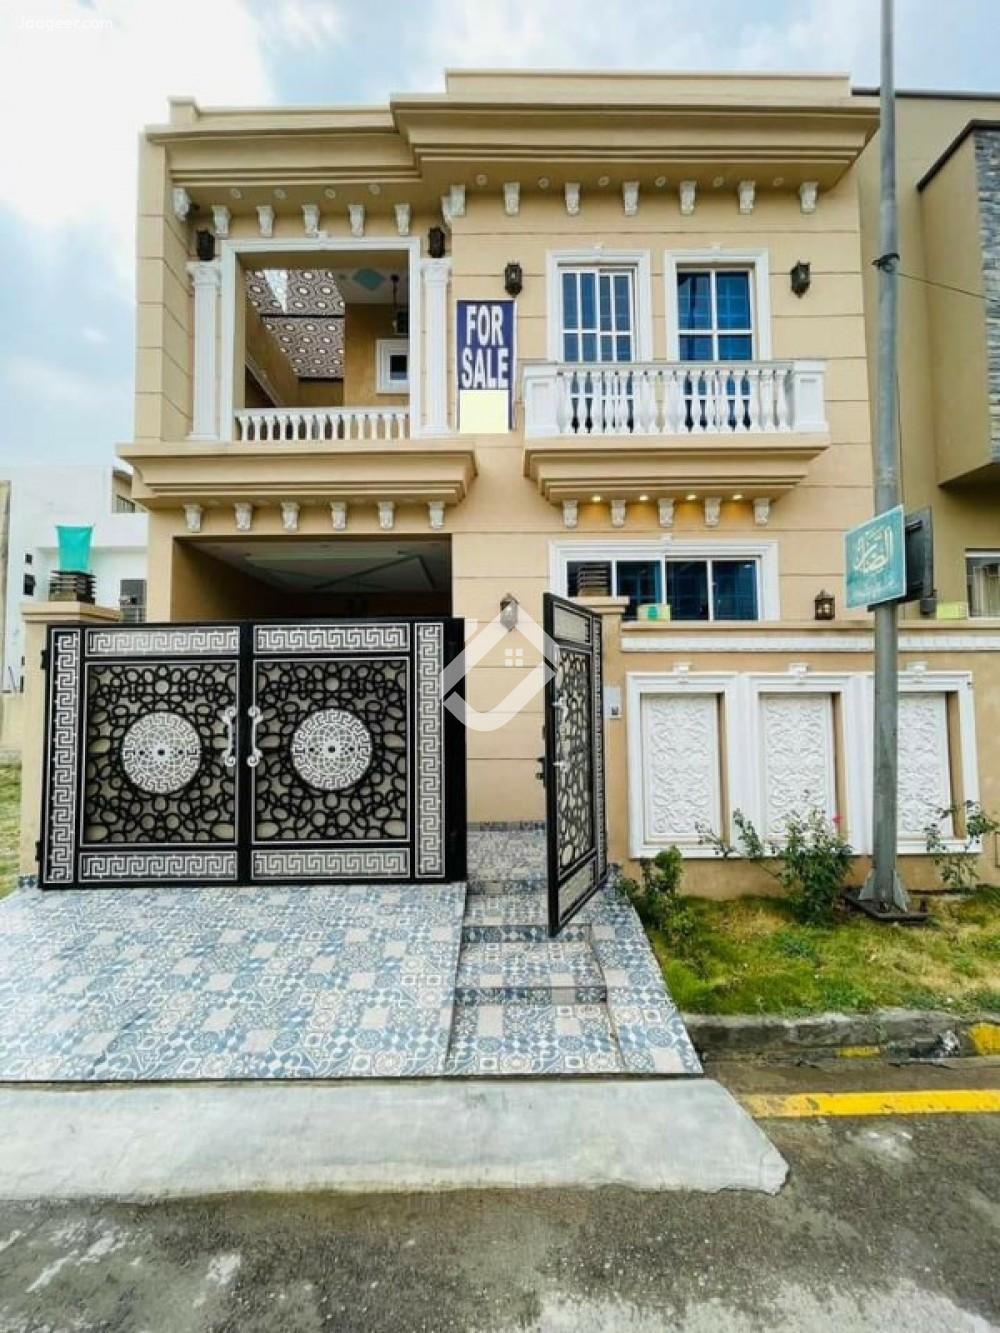 View  5 Marla Double Storey Semi Furnished House For Sale In Al kabir Town  in Al kabir Town , Lahore